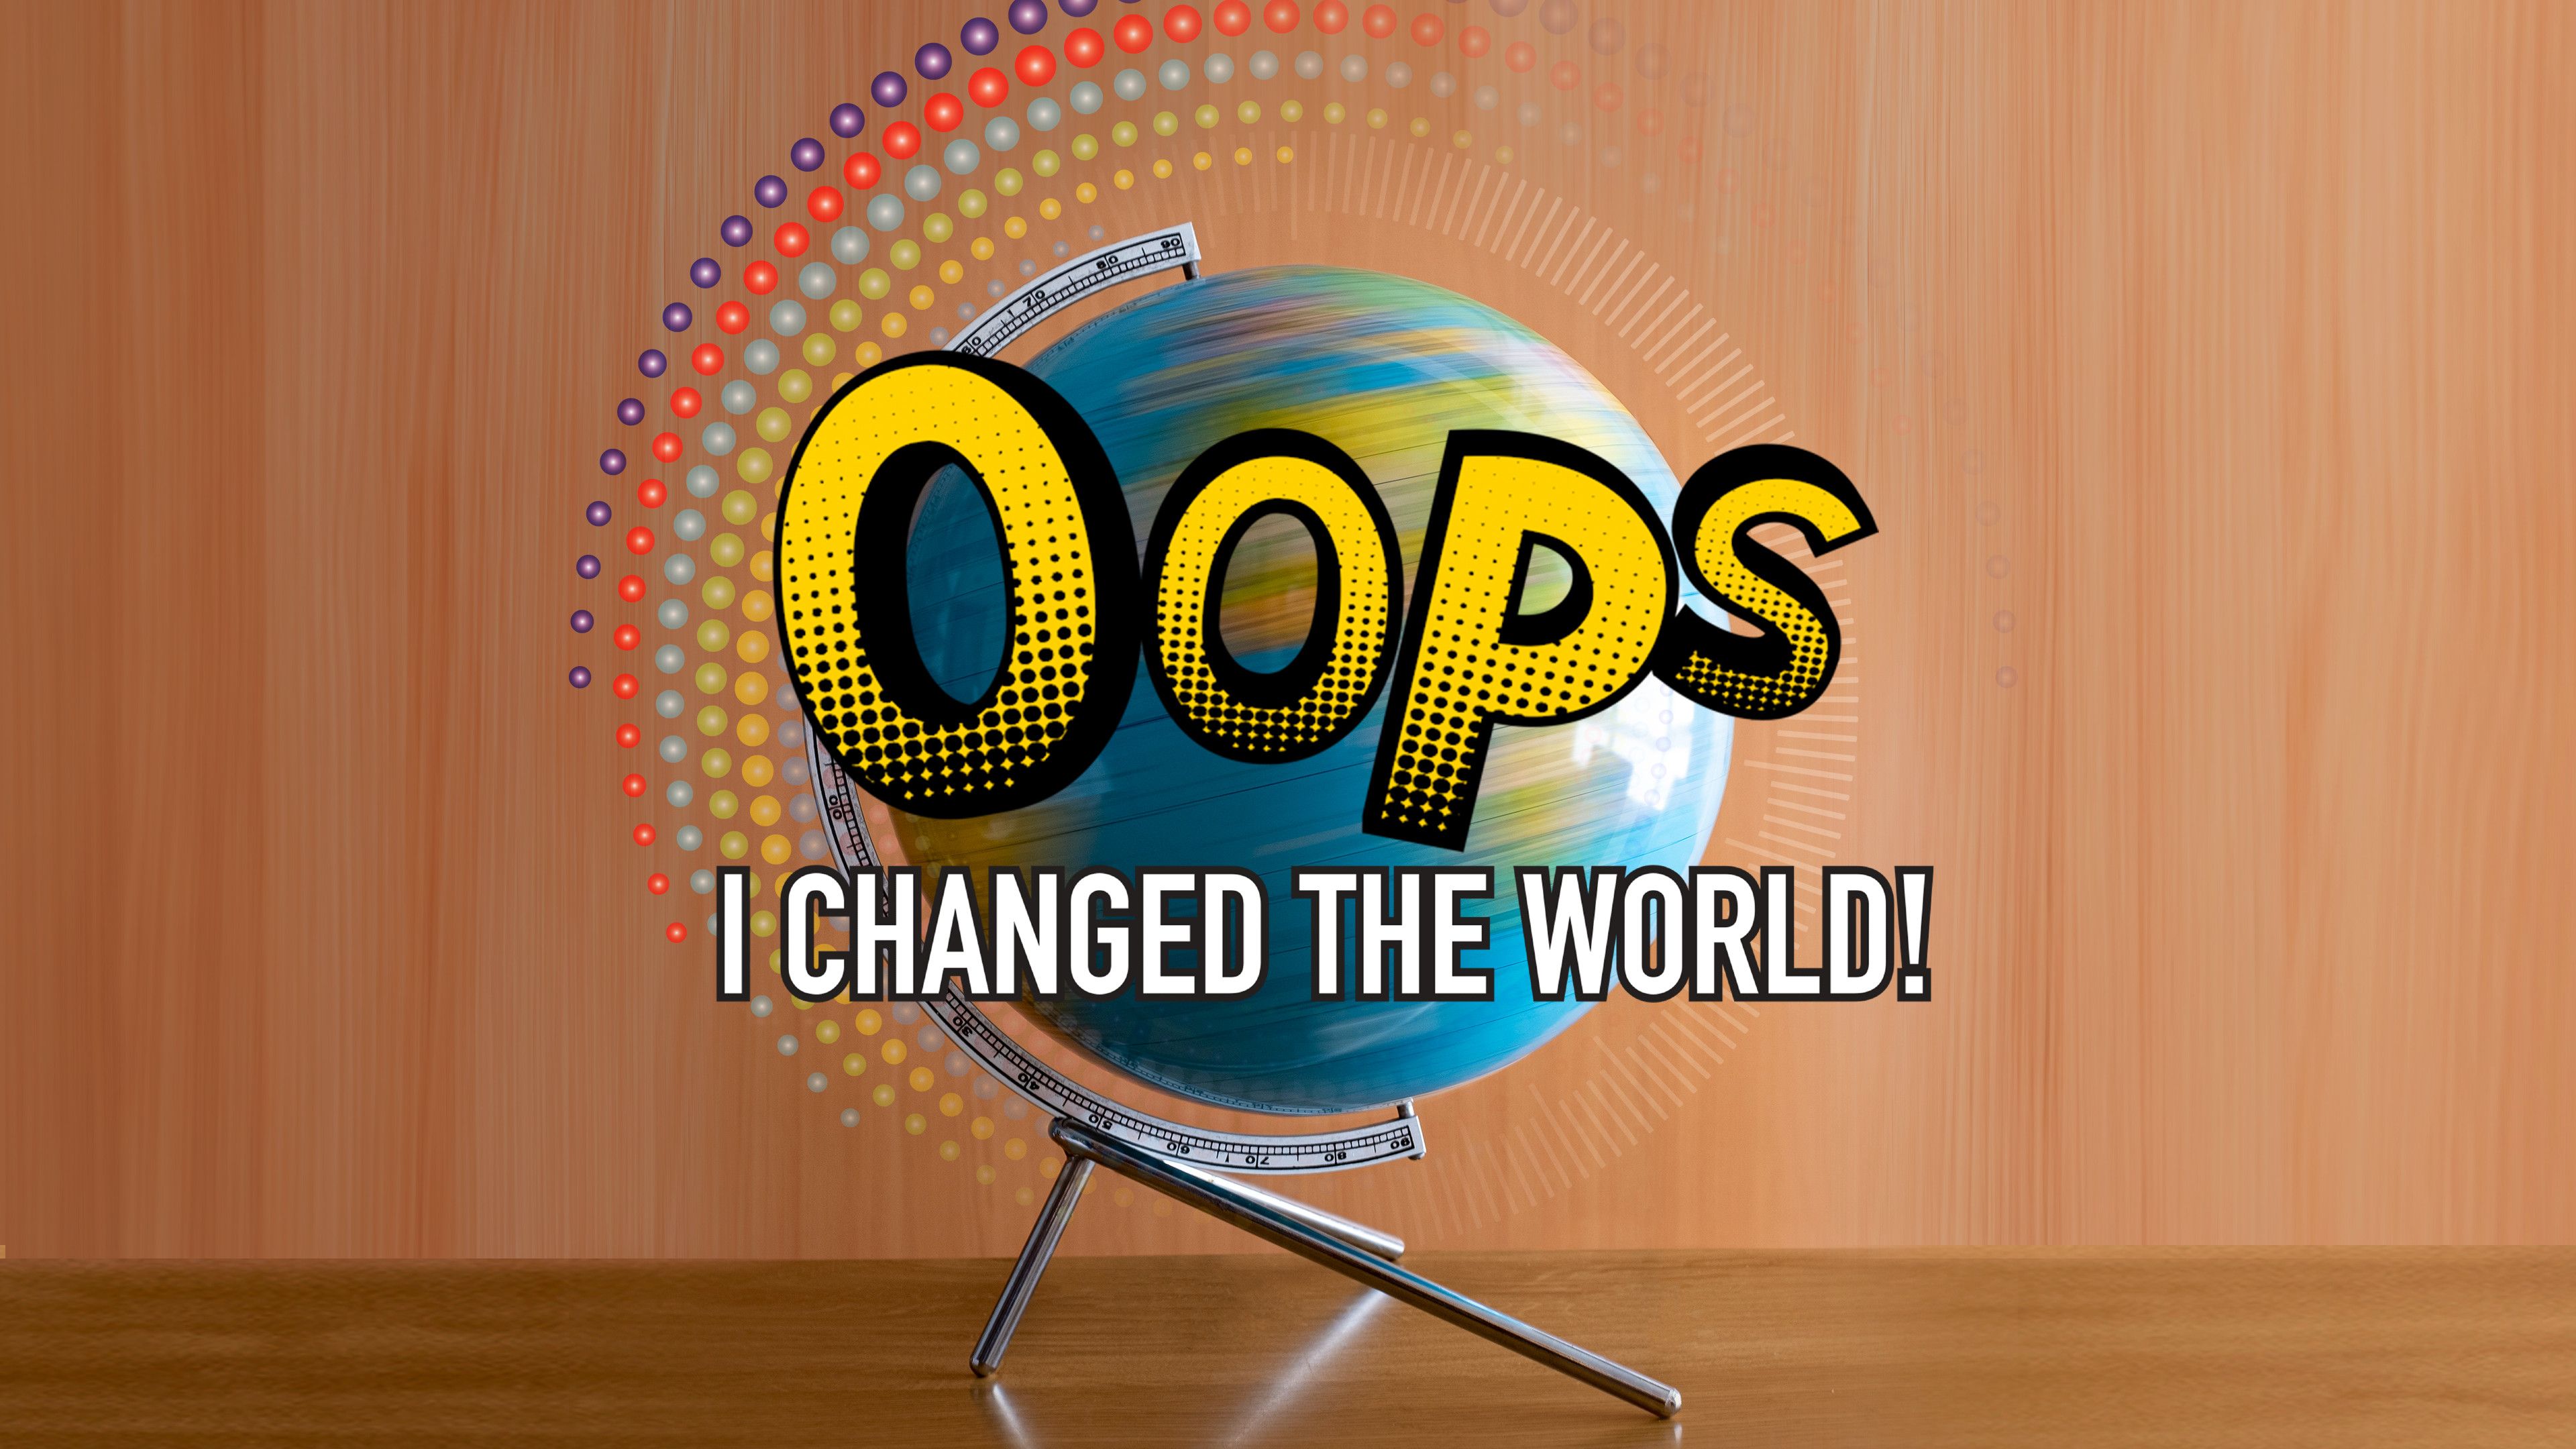 Oops, I Changed the World